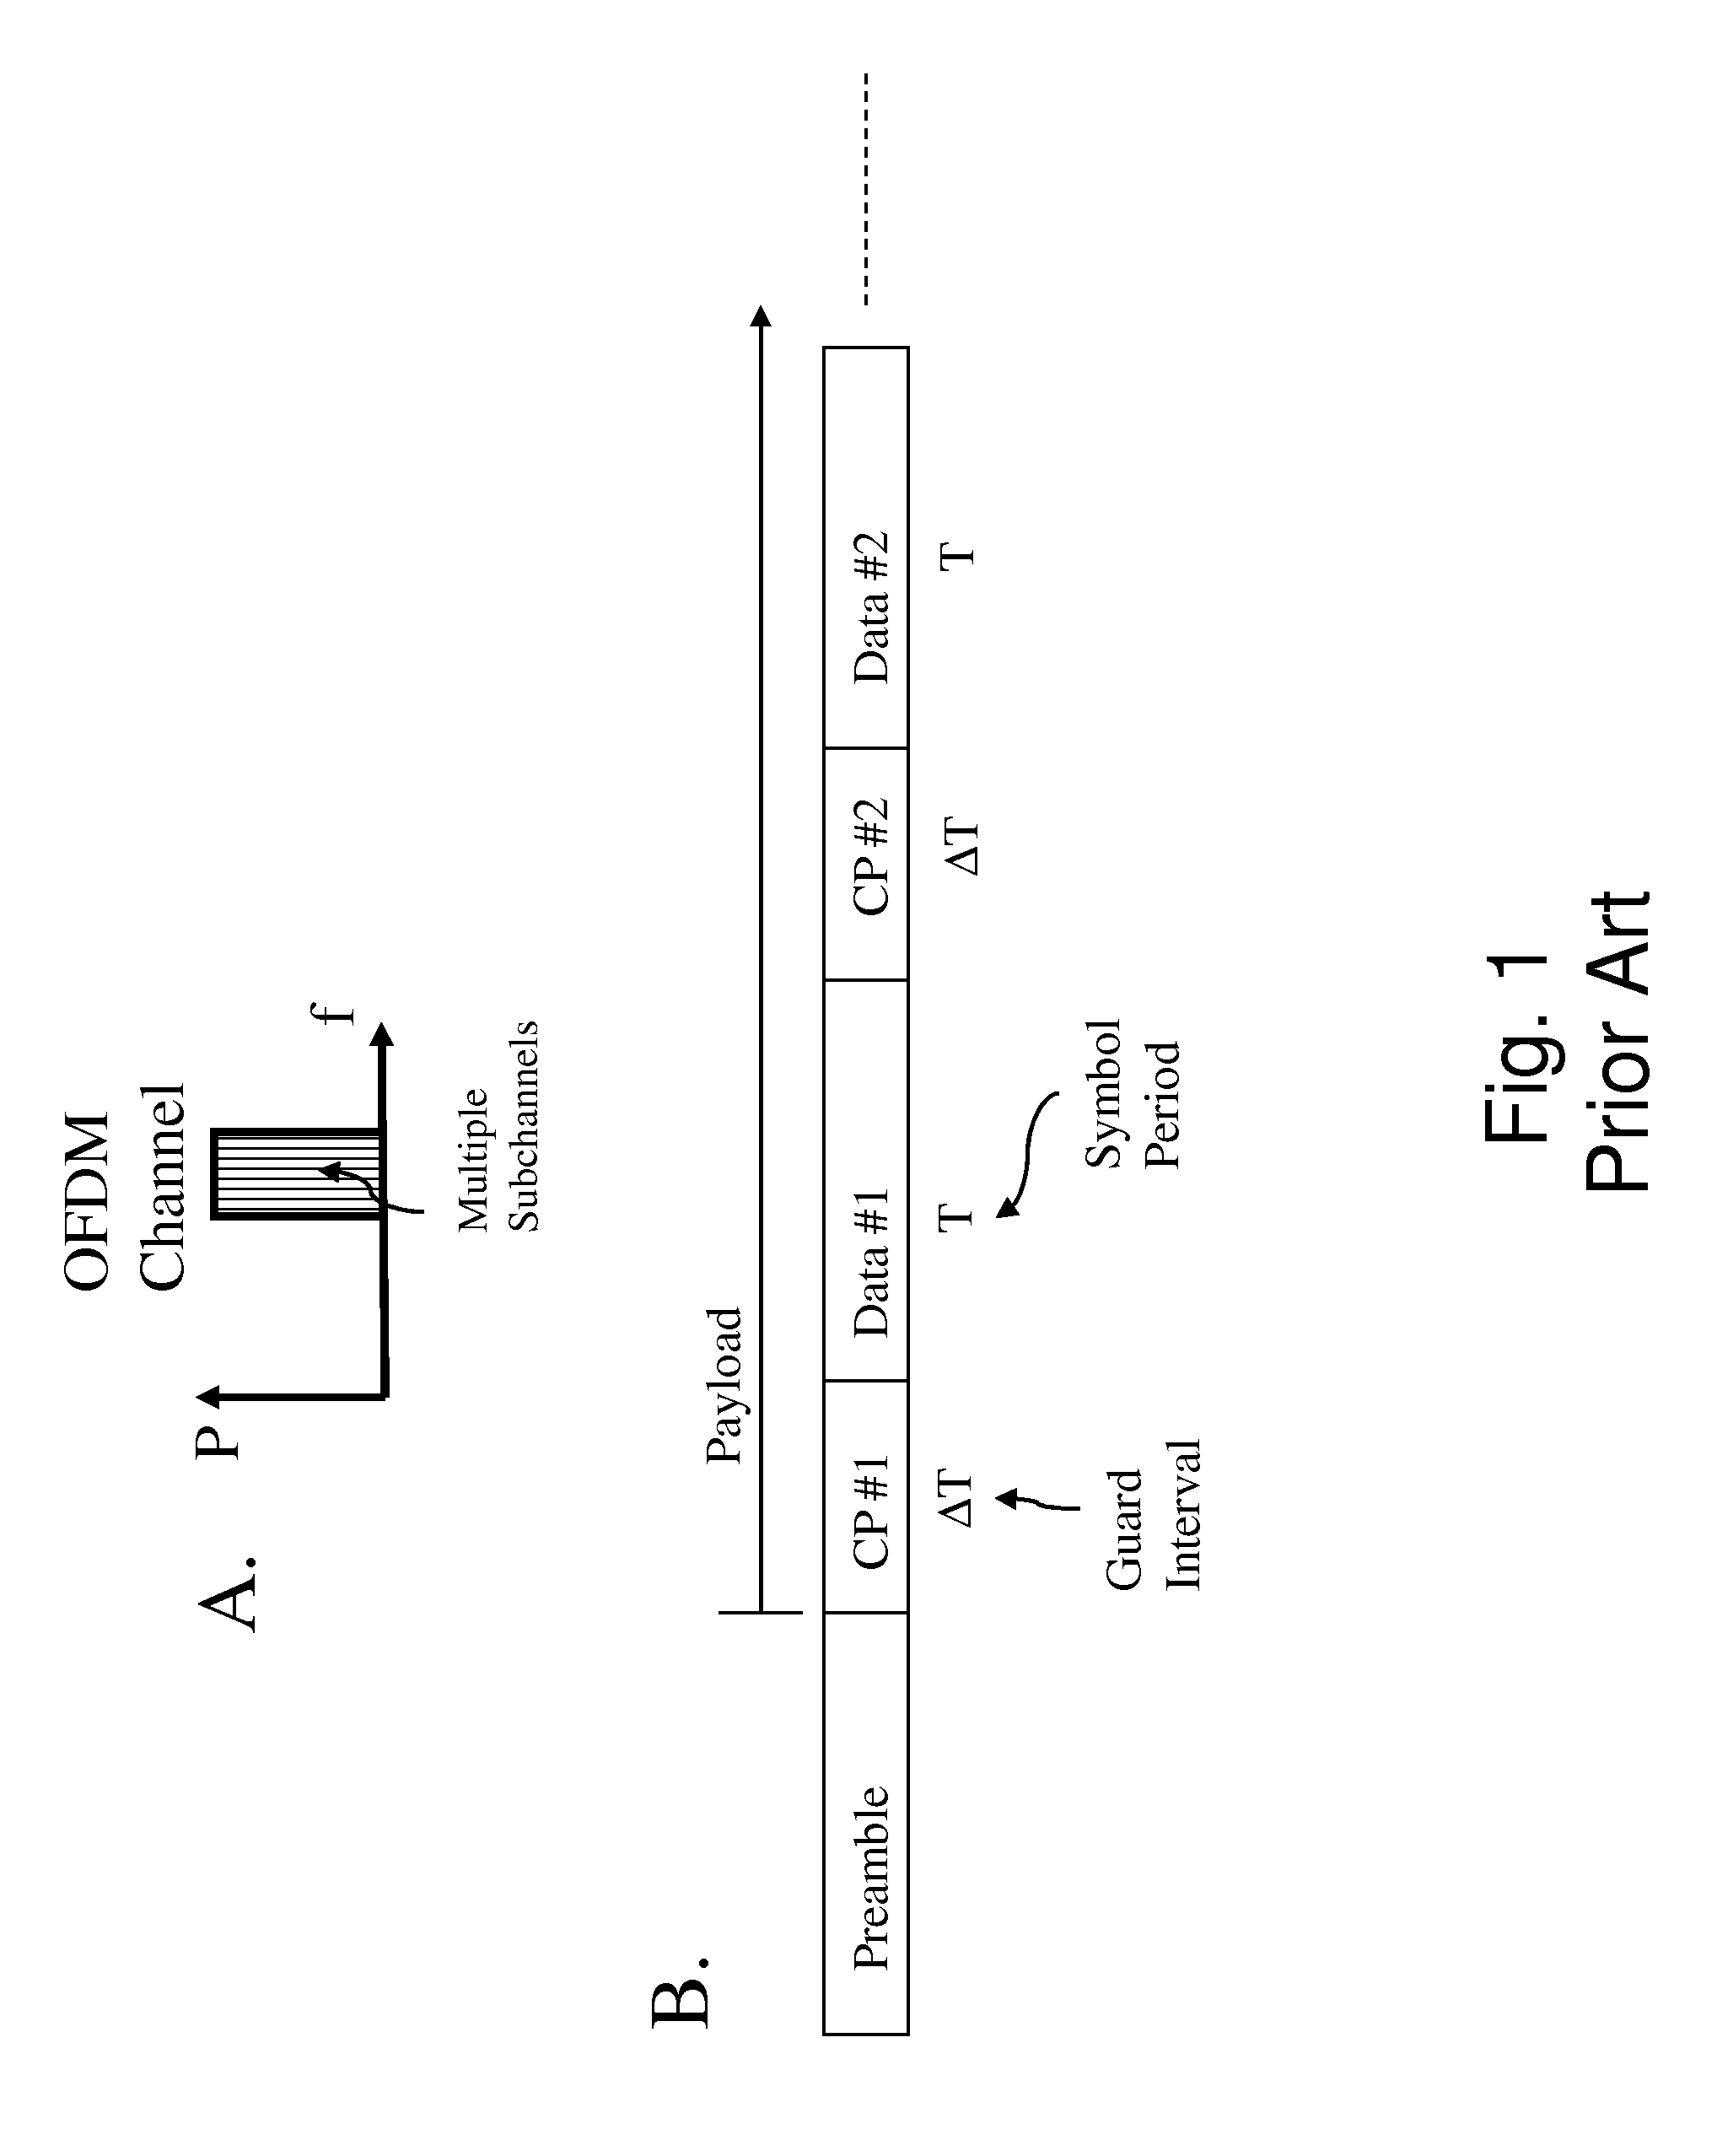 System and method for controlling combined radio signals